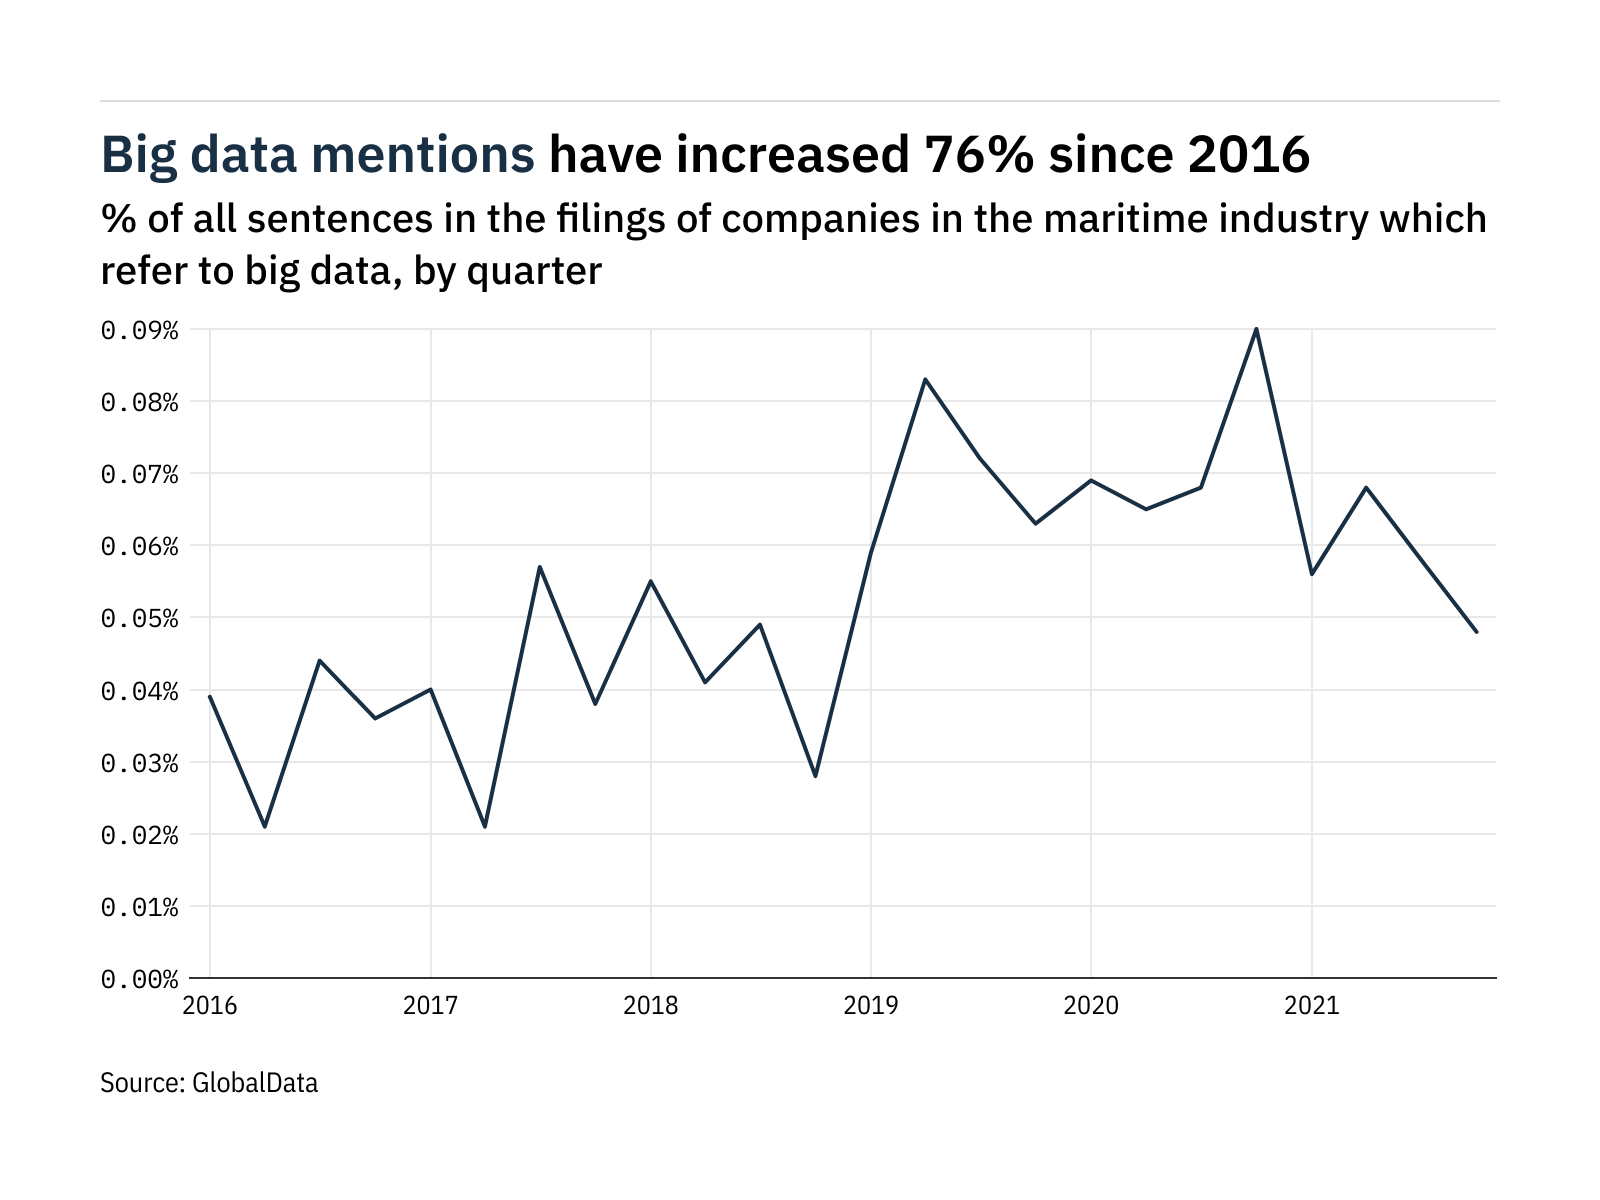 Filings buzz in the maritime industry: 17% decrease in big data mentions in Q4 of 2021